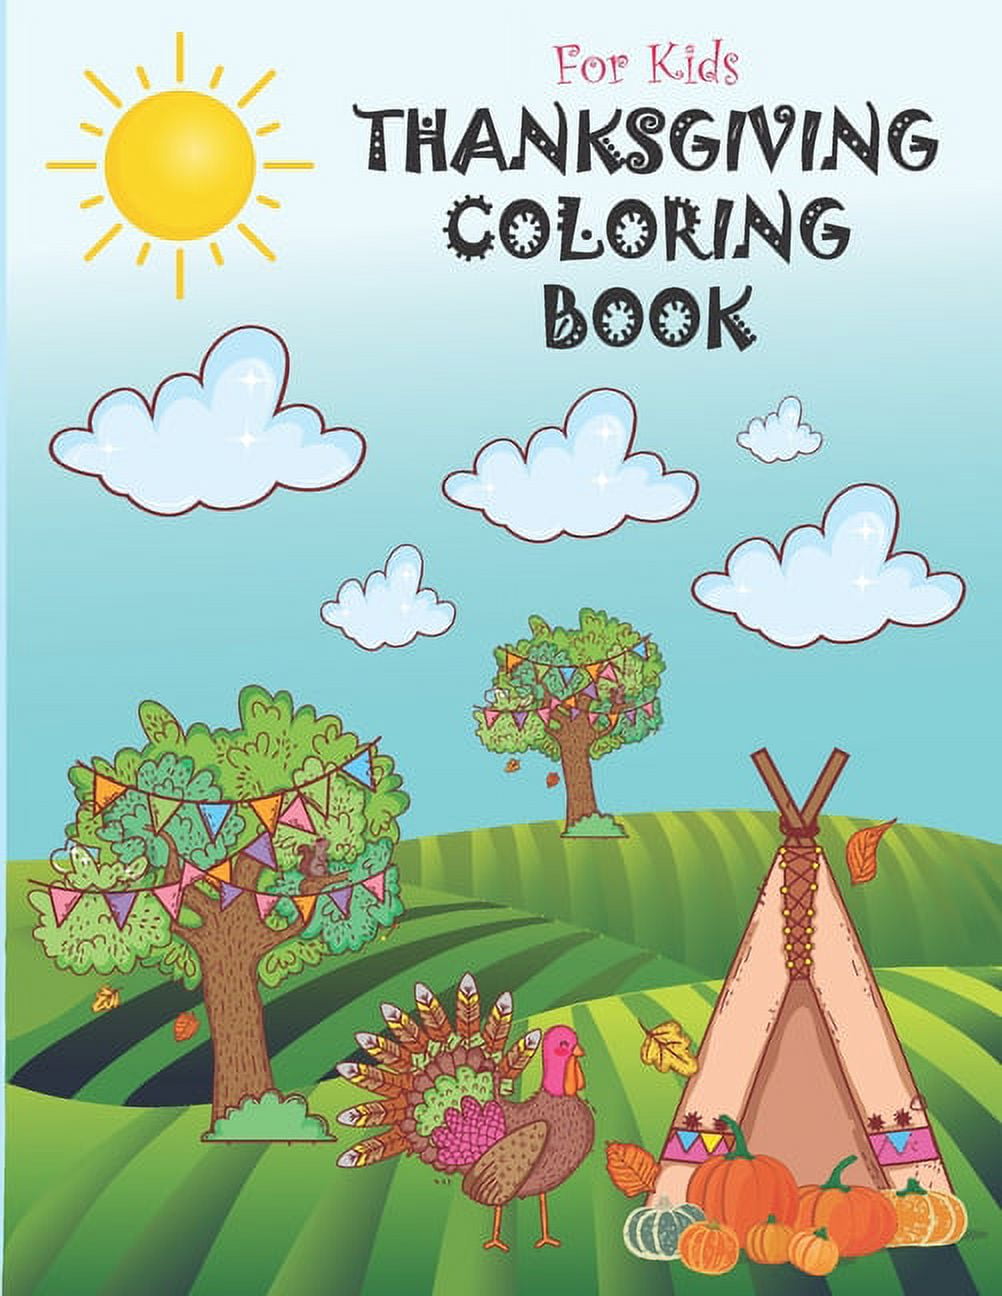 Thanksgiving coloring book for kids turkey coloring book happy thanksgiving coloring book for kids thanksgiving coloring book for toddlers a collection of fun and cute thanksgiving coloring pages toddler fall and